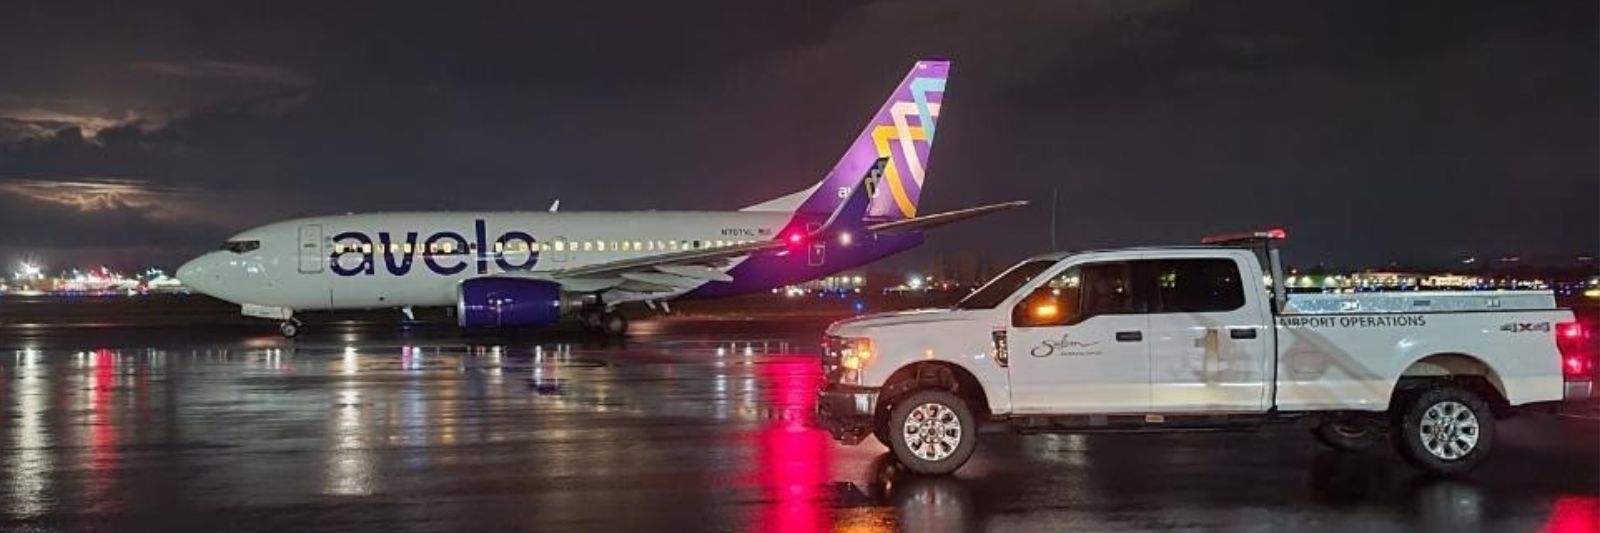 Avelo Jet and Airport Operations truck